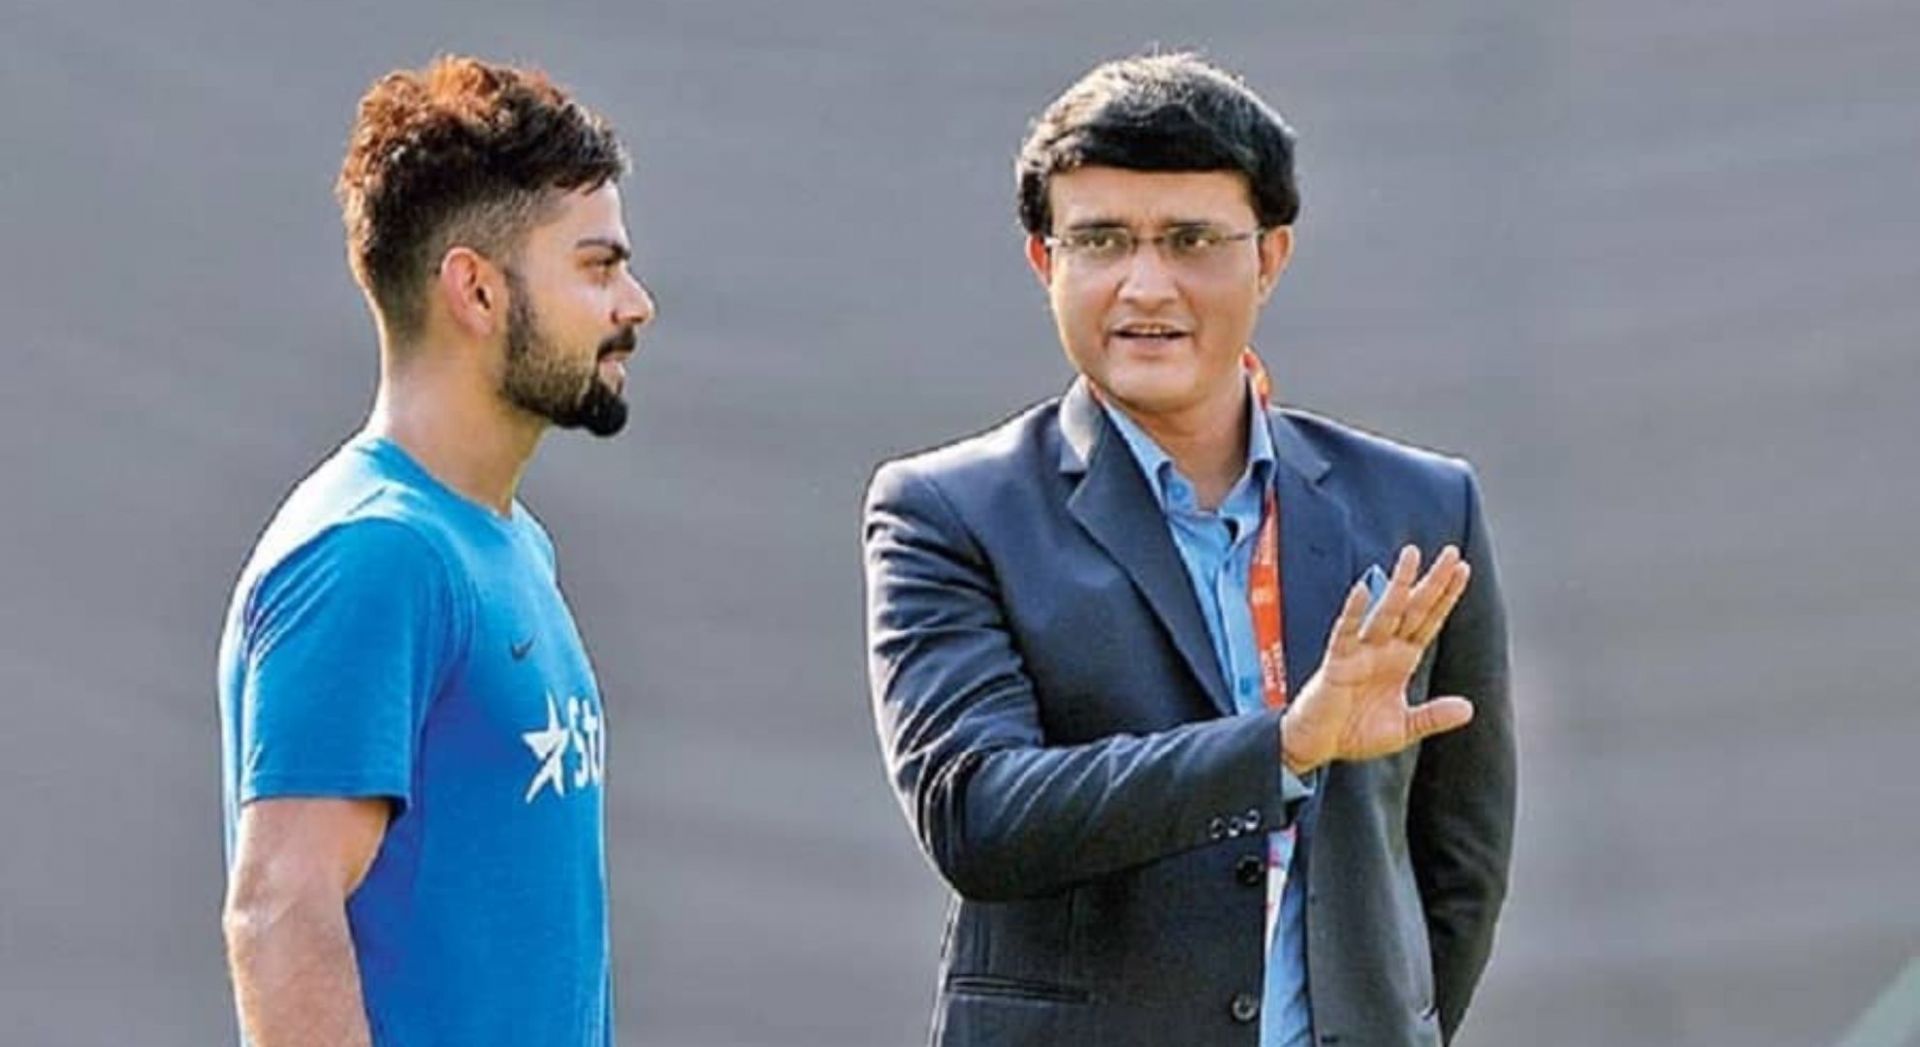 Both Sourav Ganguly and Virat Kohli have served as India captain across formats. [Pic credits: Telegraph India]